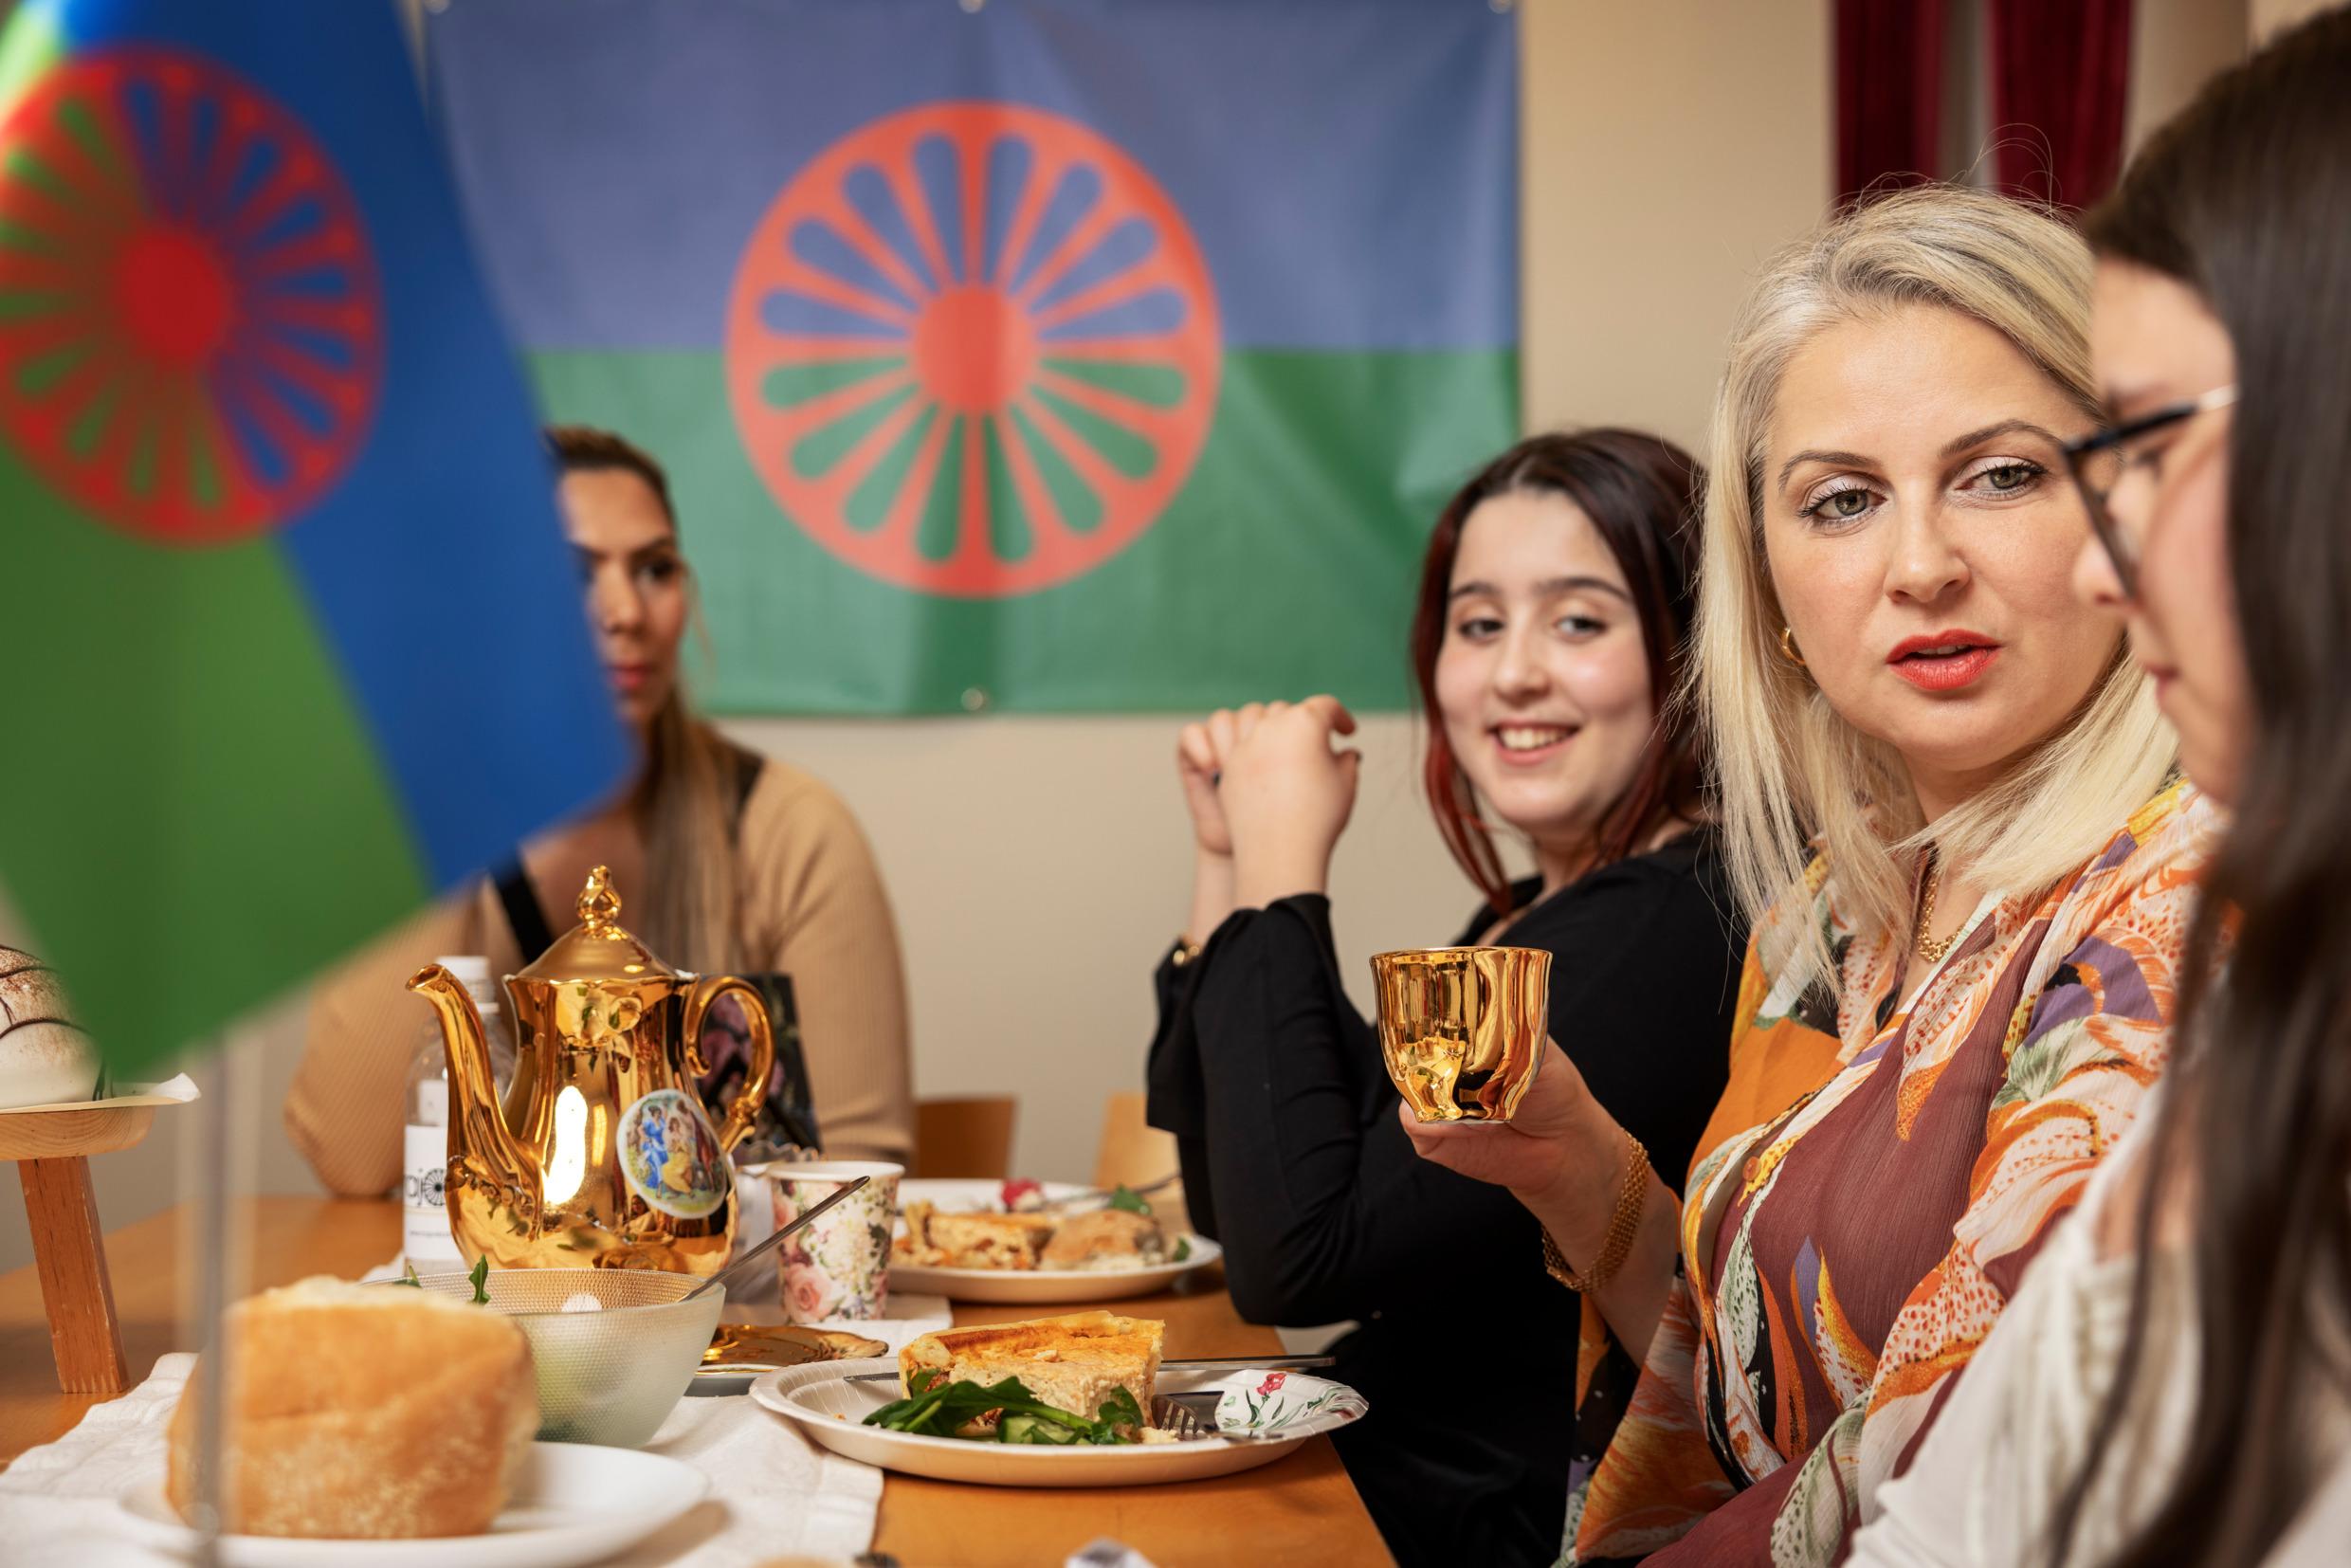 Four women sit around a table eating pie and drinking tea. Roman flags are visible in the picture.